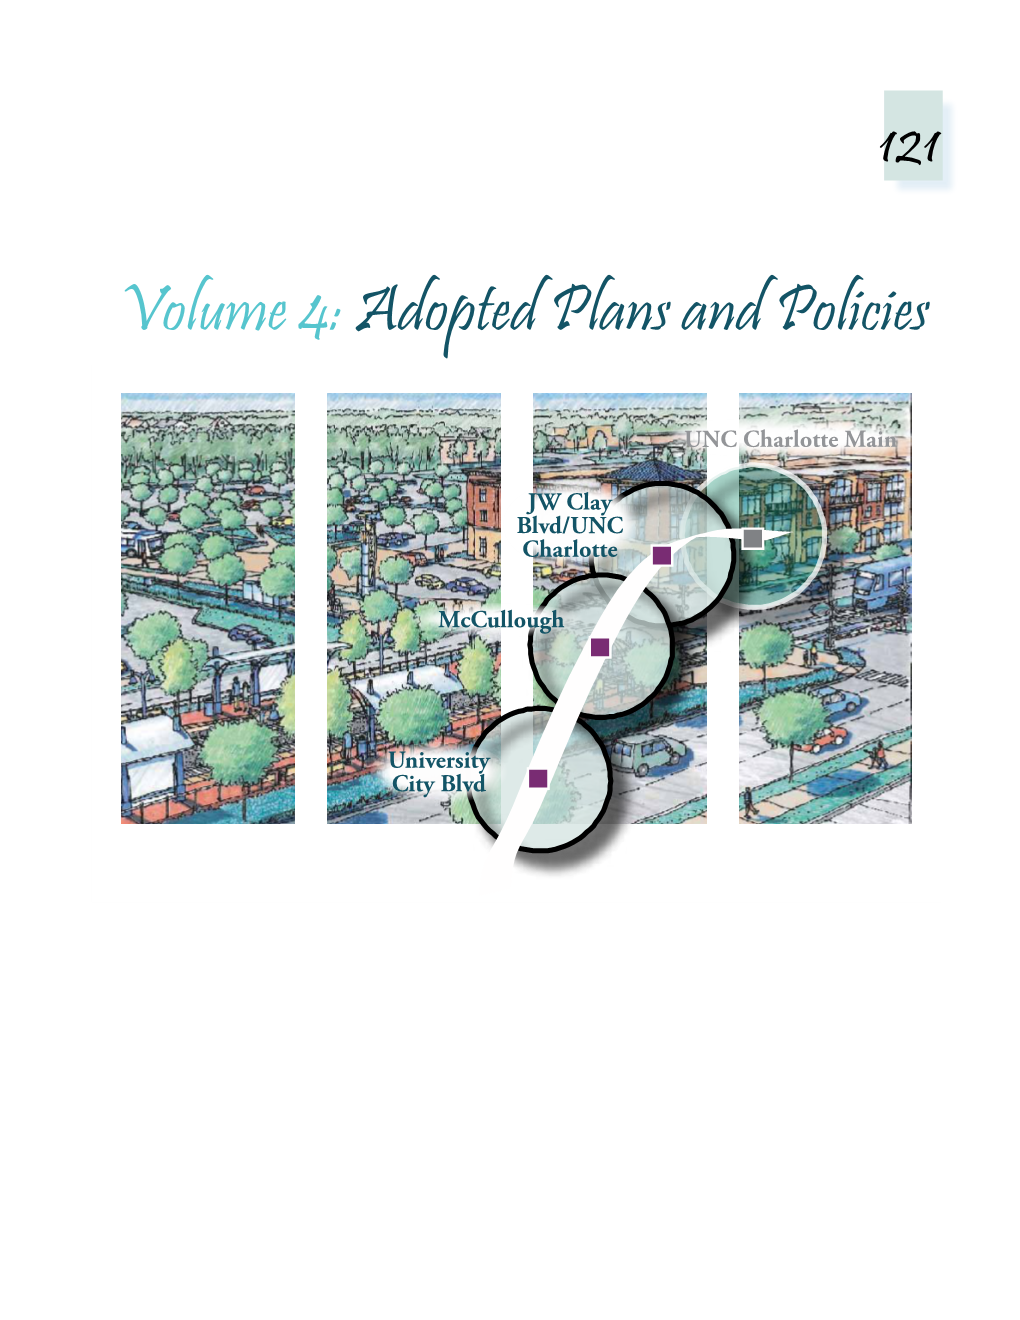 Volume 4: Adopted Plans and Policies